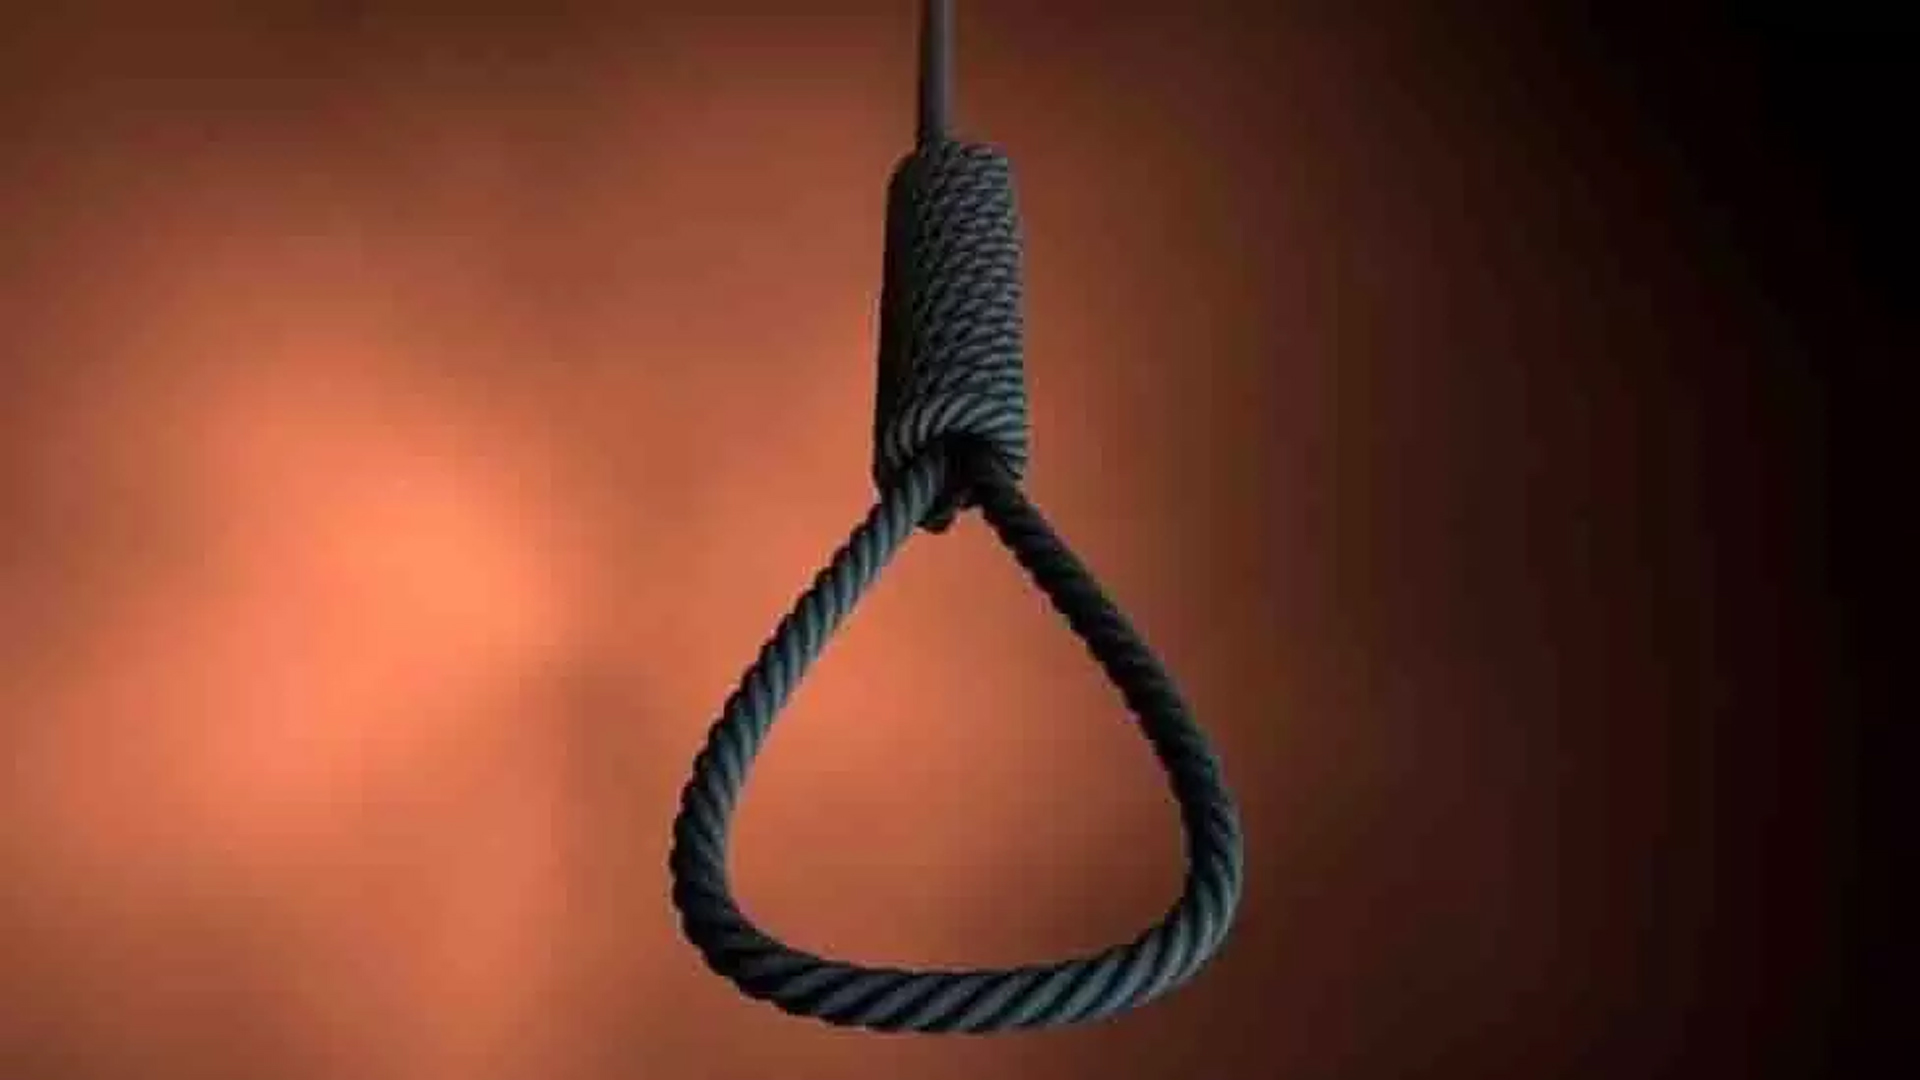 Youth committed suicide by hanging, police investigating